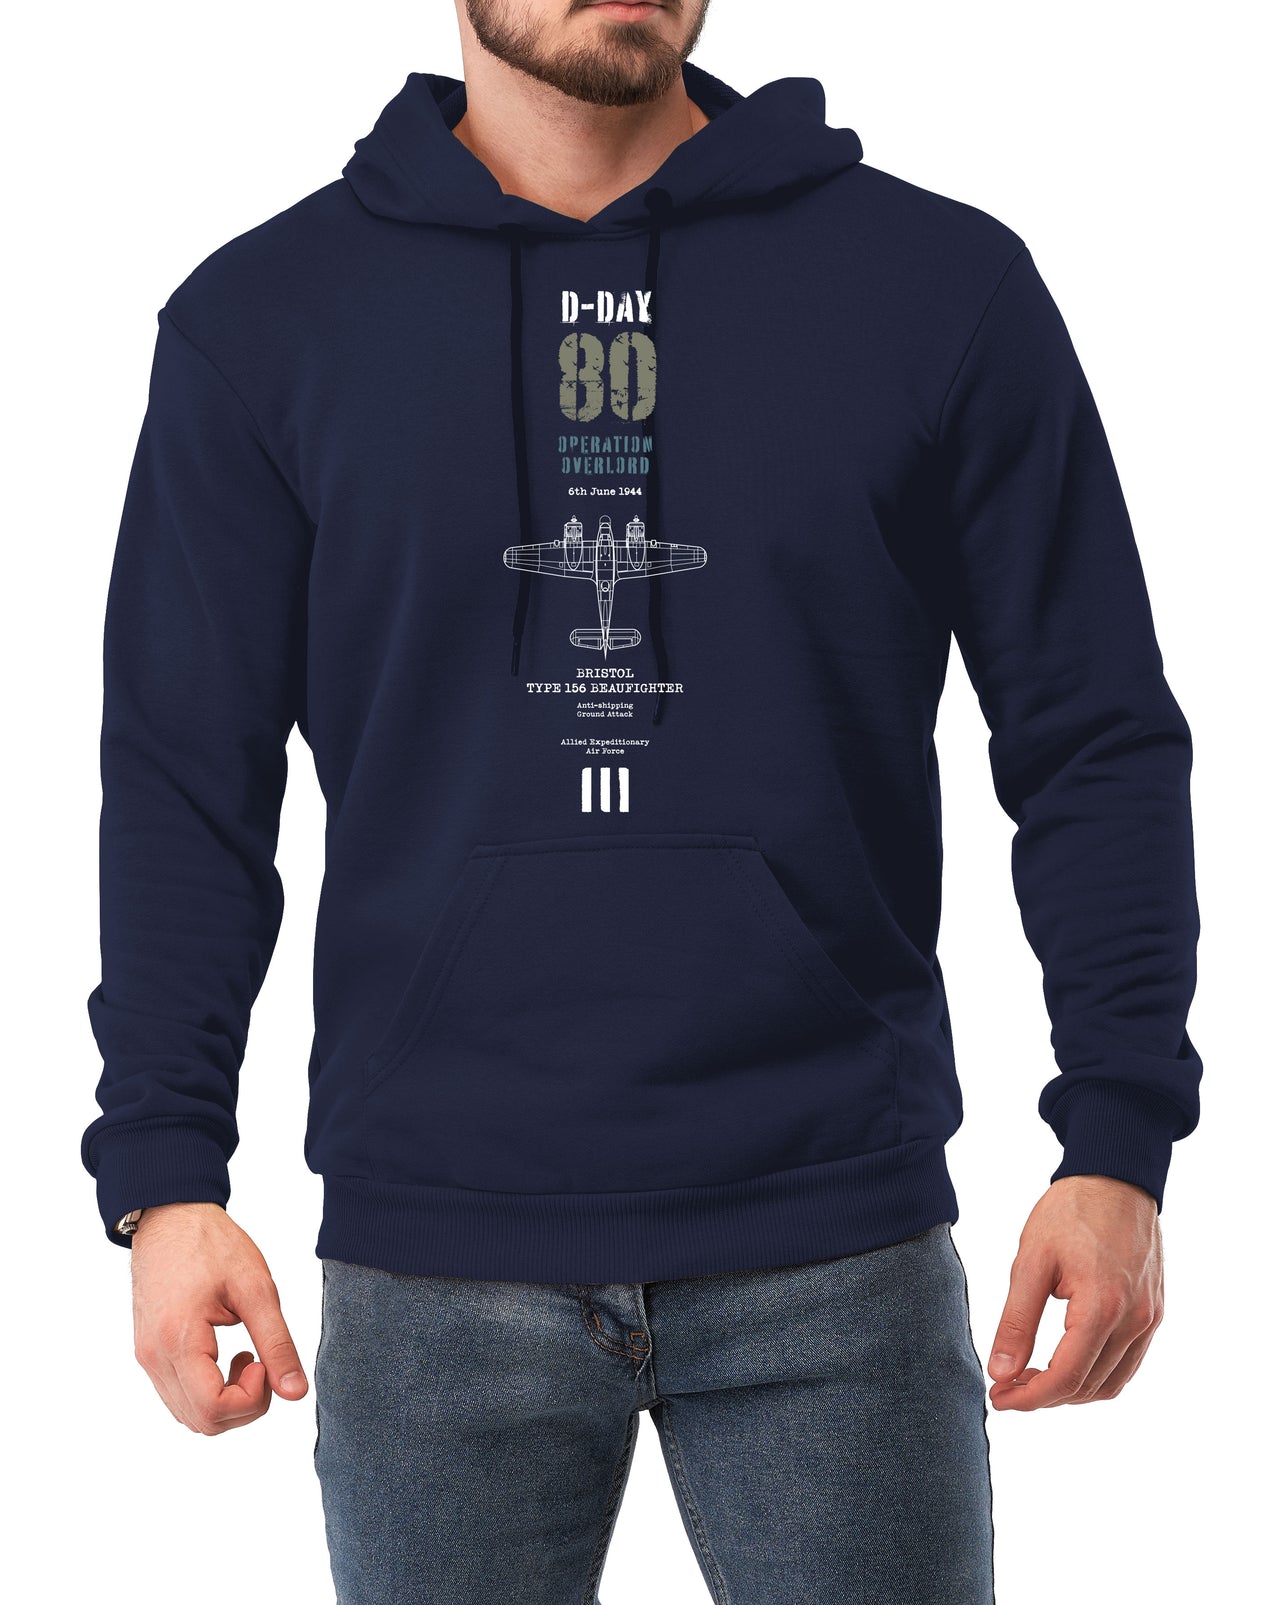 D-Day Beaufighter - Hoodie